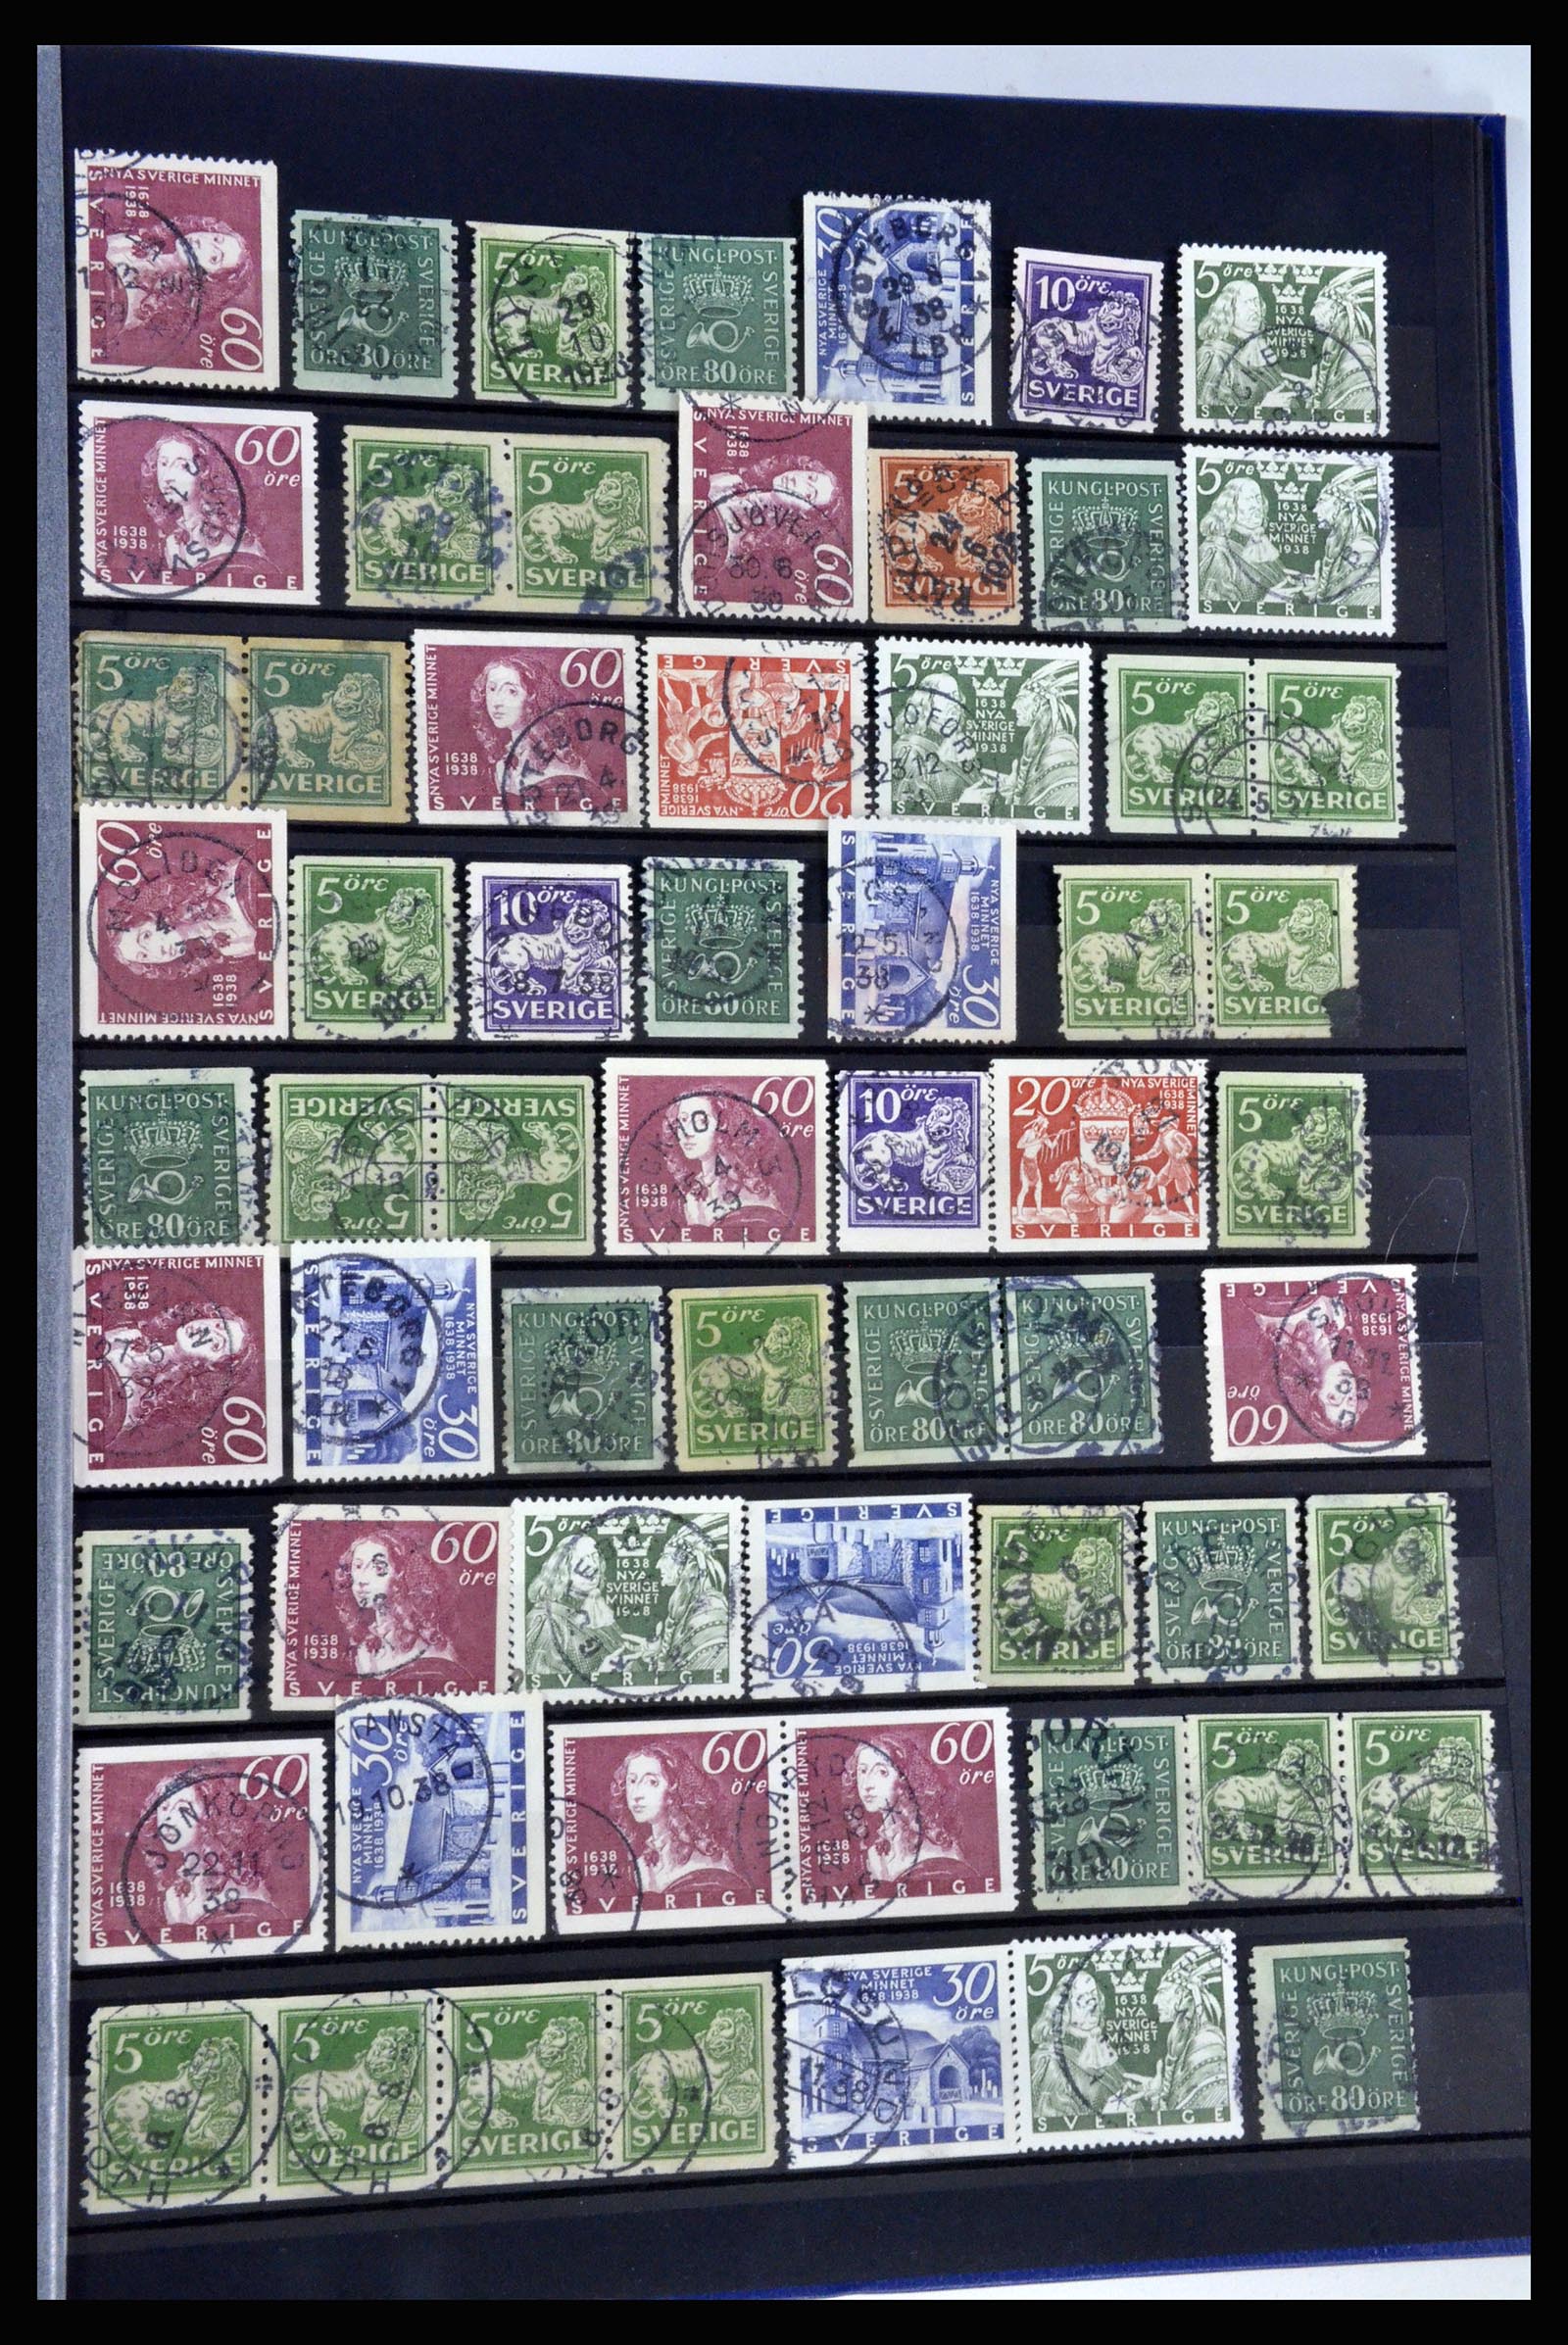 36316 051 - Stamp collection 36316 Sweden cancellations 1920-1938.